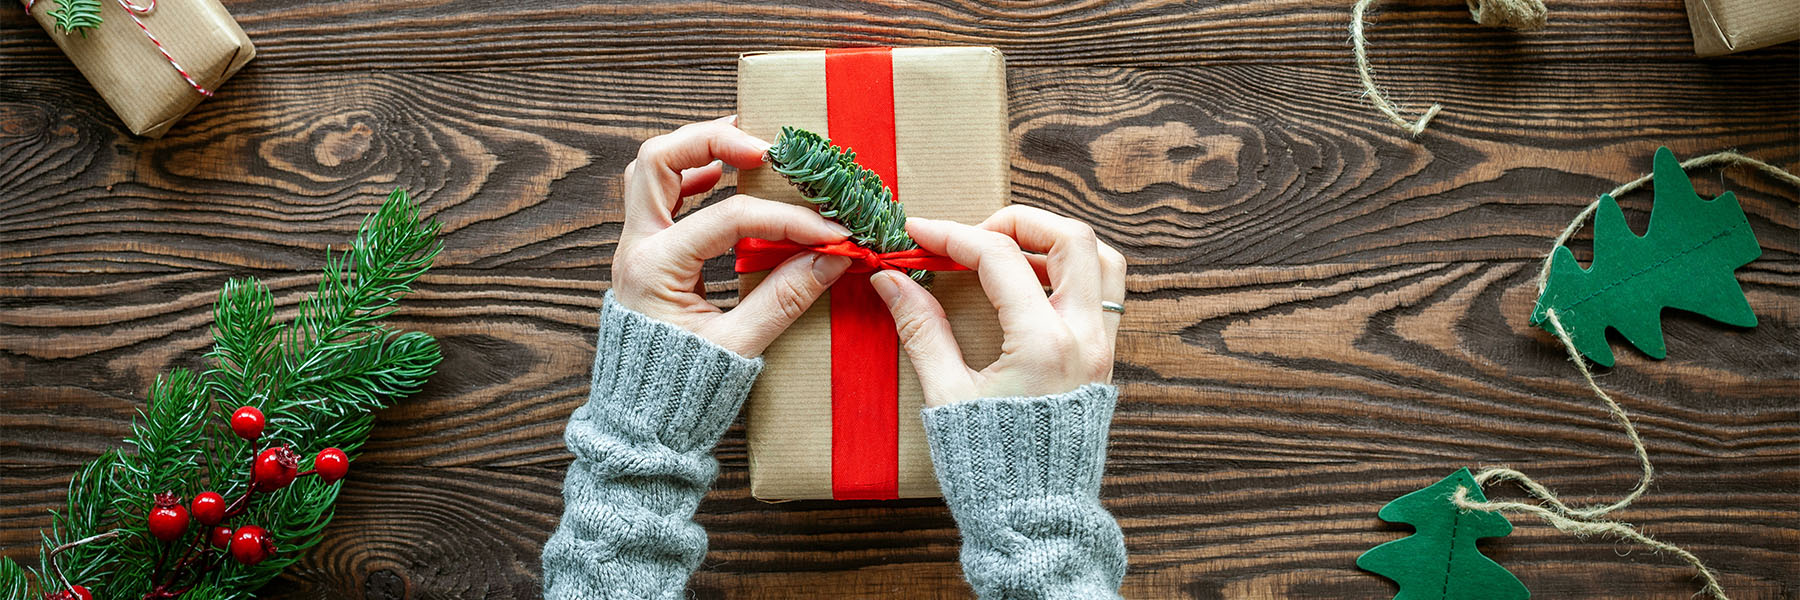 Your Hassle-Free Xmas Shopping Guide | Clicks IT Recruitment